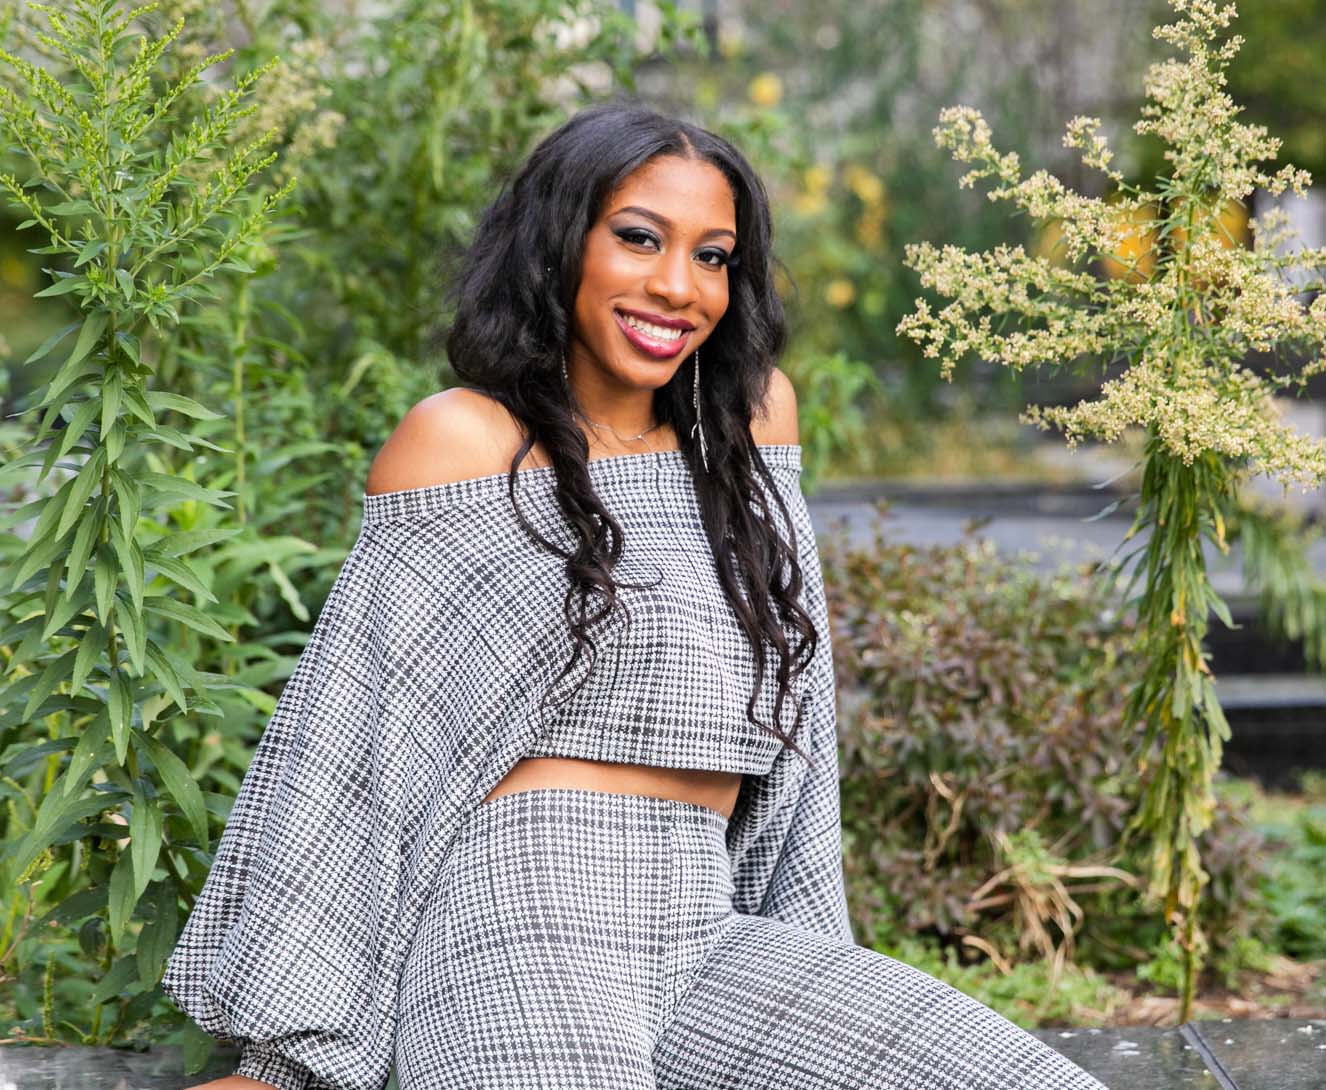 Young filmmaker Aria Harrell sitting outdoors and smiling to the camera. Aria wears a stripped black and white top and pant outfit and is surrounded by greenery.